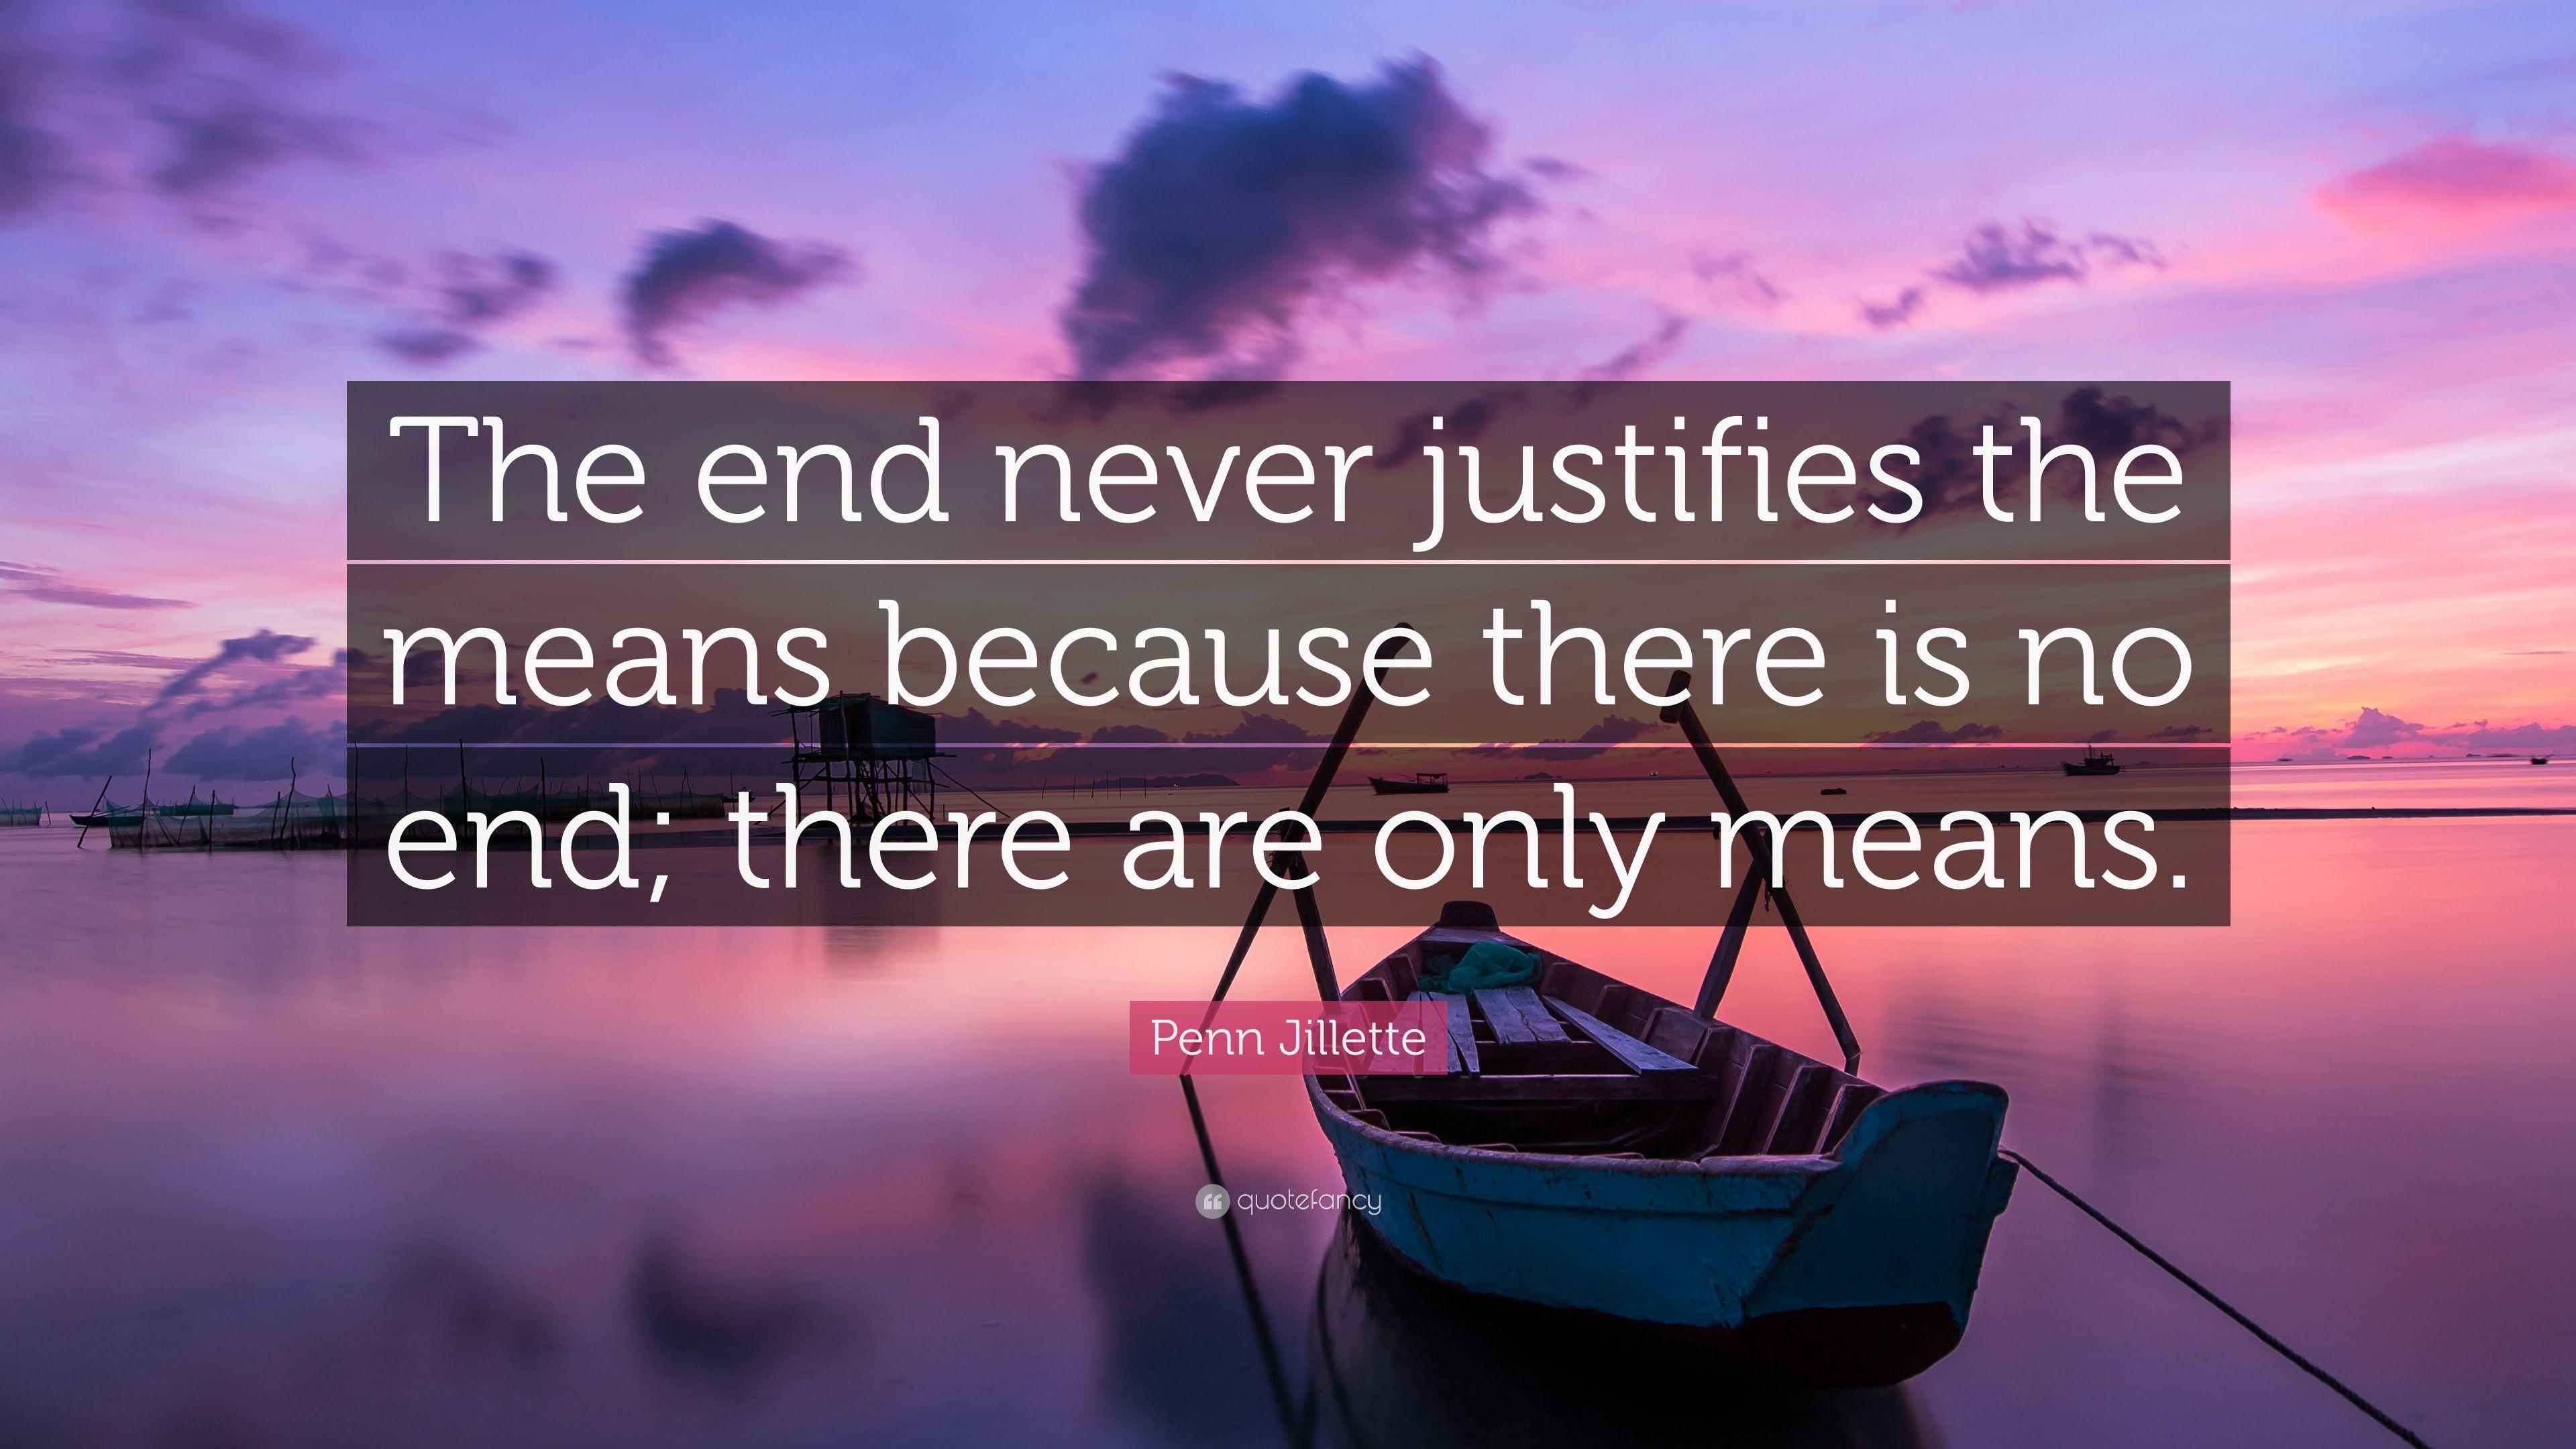 Penn Jillette Quote: “The end never justifies the means because